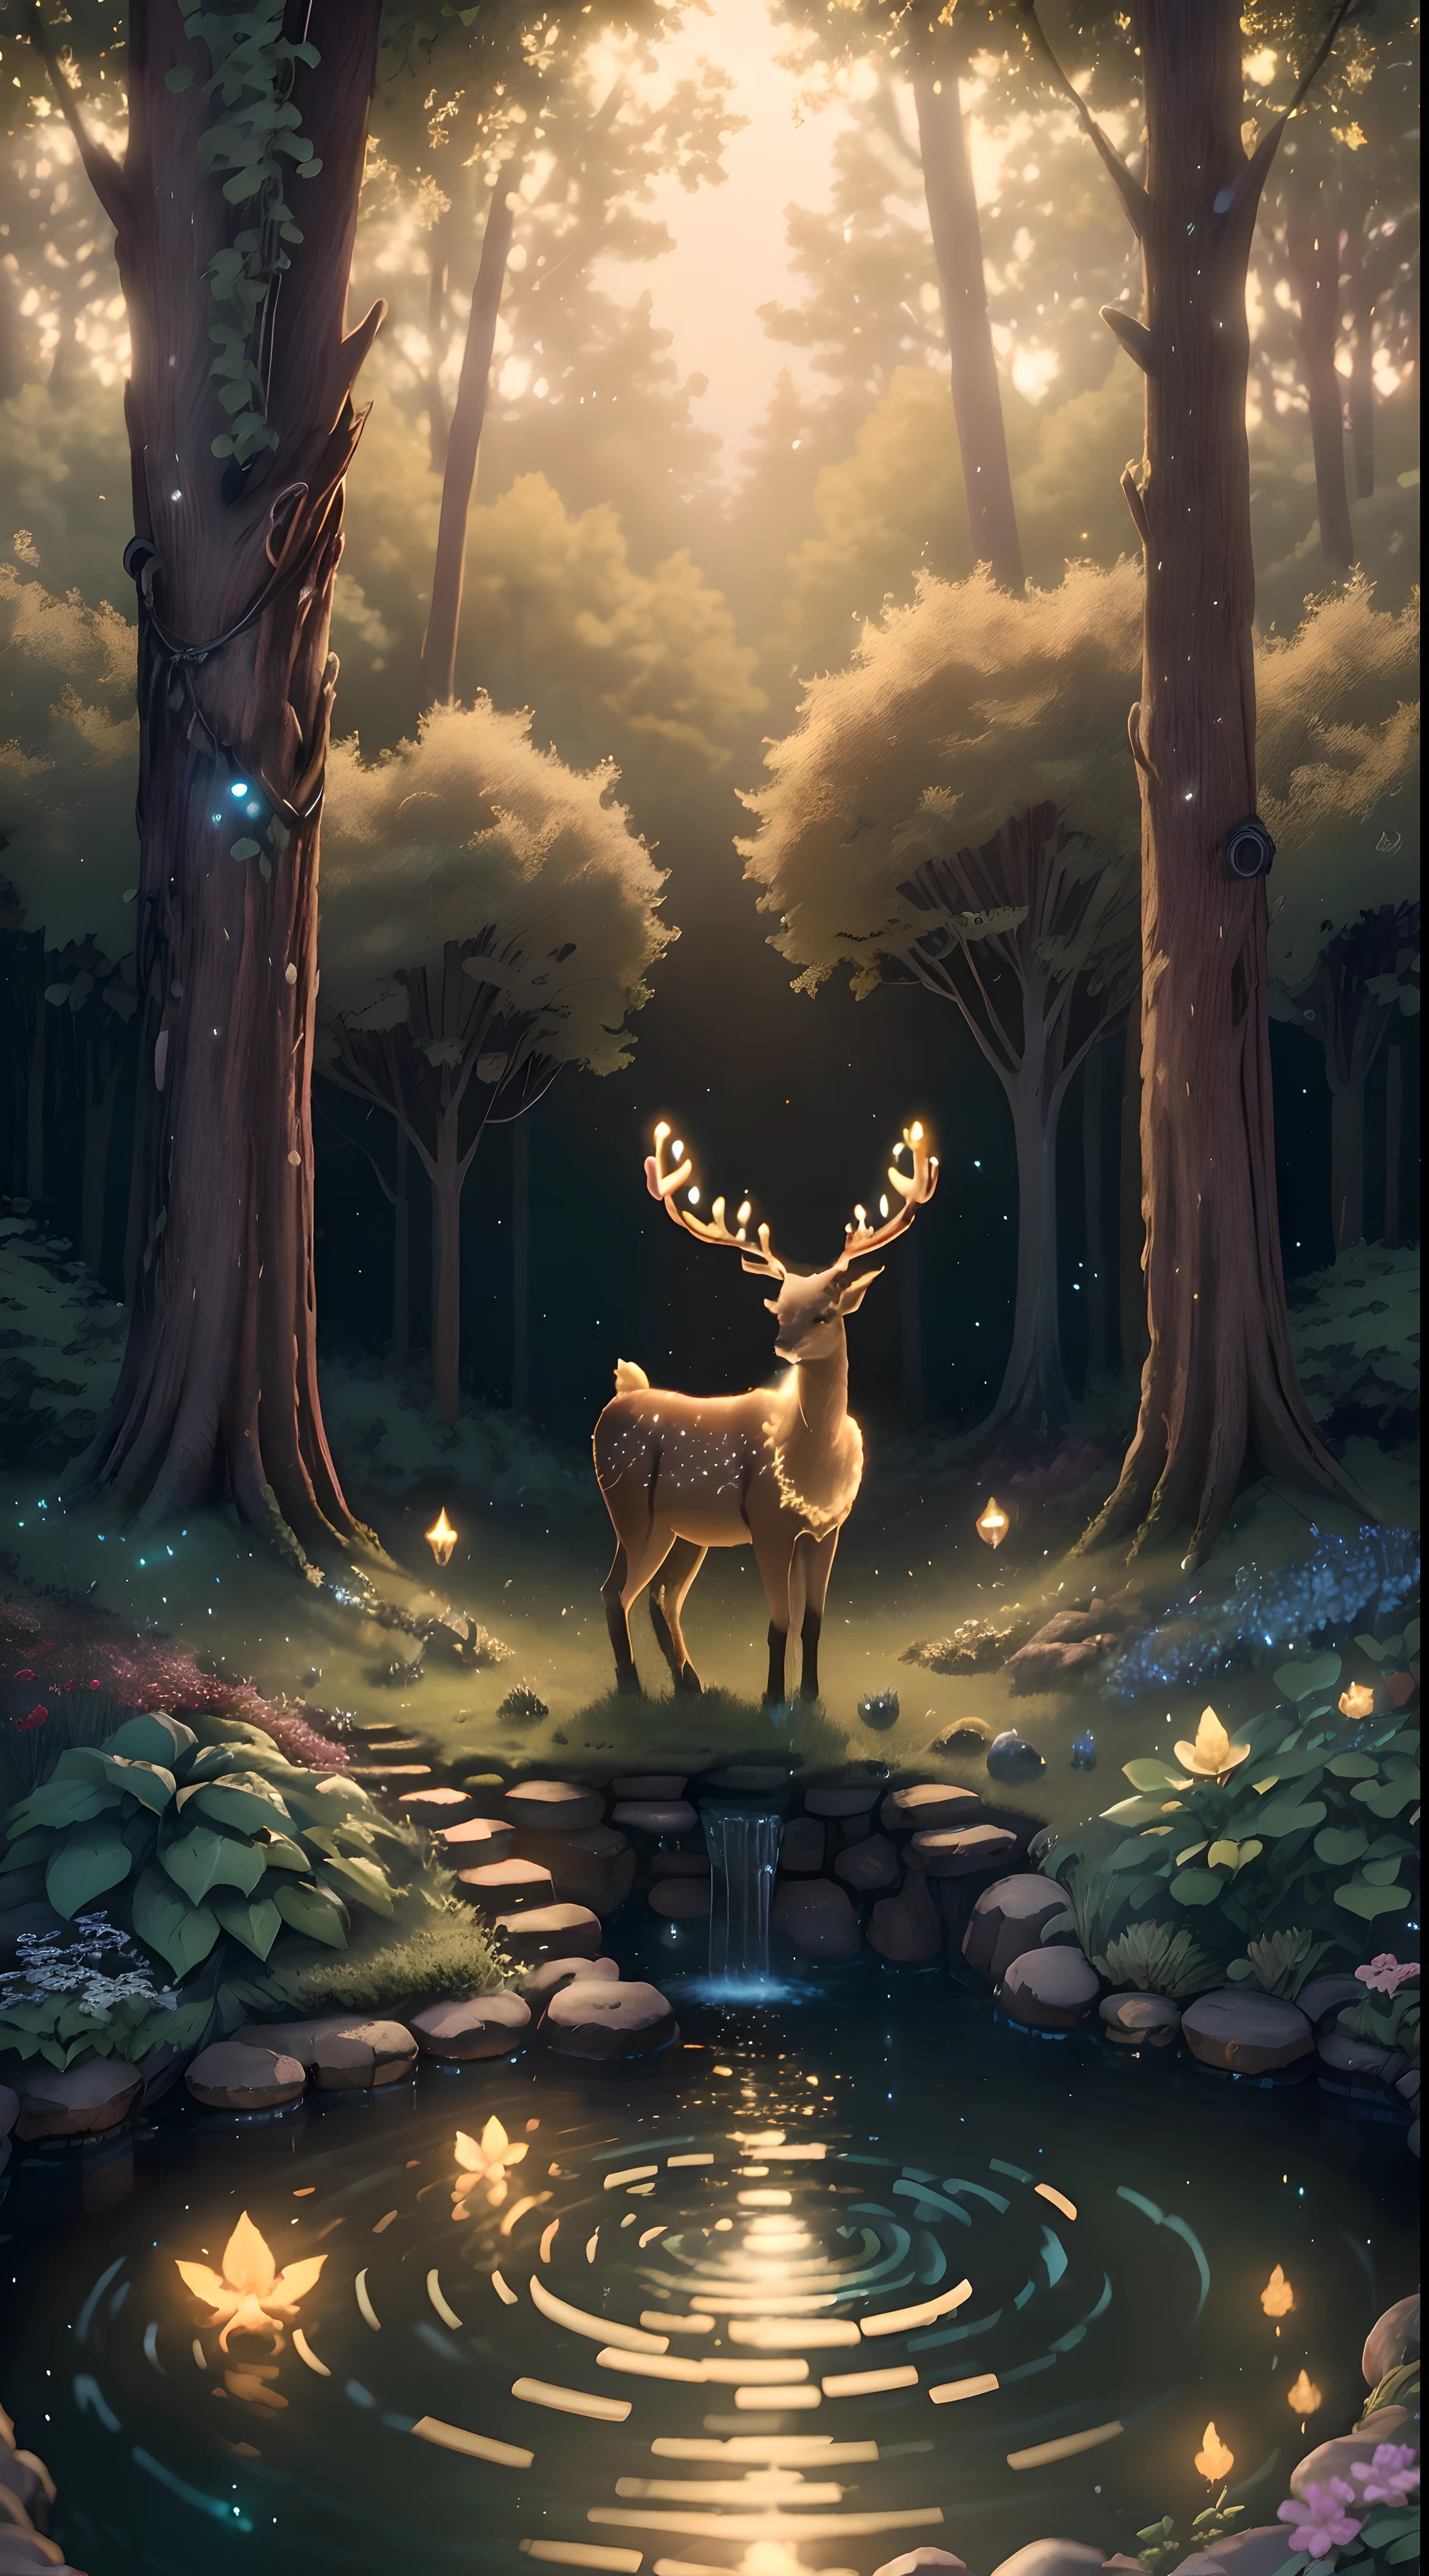 Masterpiece, best quality, (very detailed CG unified 8k wallpaper), (best quality), (best illustration), (best shadow), glowing elf with a glowing deer, drinking water in the pool, natural elements in forest theme. Mysterious forest, beautiful forest, nature, surrounded by flowers, delicate leaves and branches surrounded by fireflies (natural elements), (jungle theme), (leaves), (branches), (fireflies), (particle effects) and other 3D, Octane rendering, ray tracing, super detailed , deer --v6